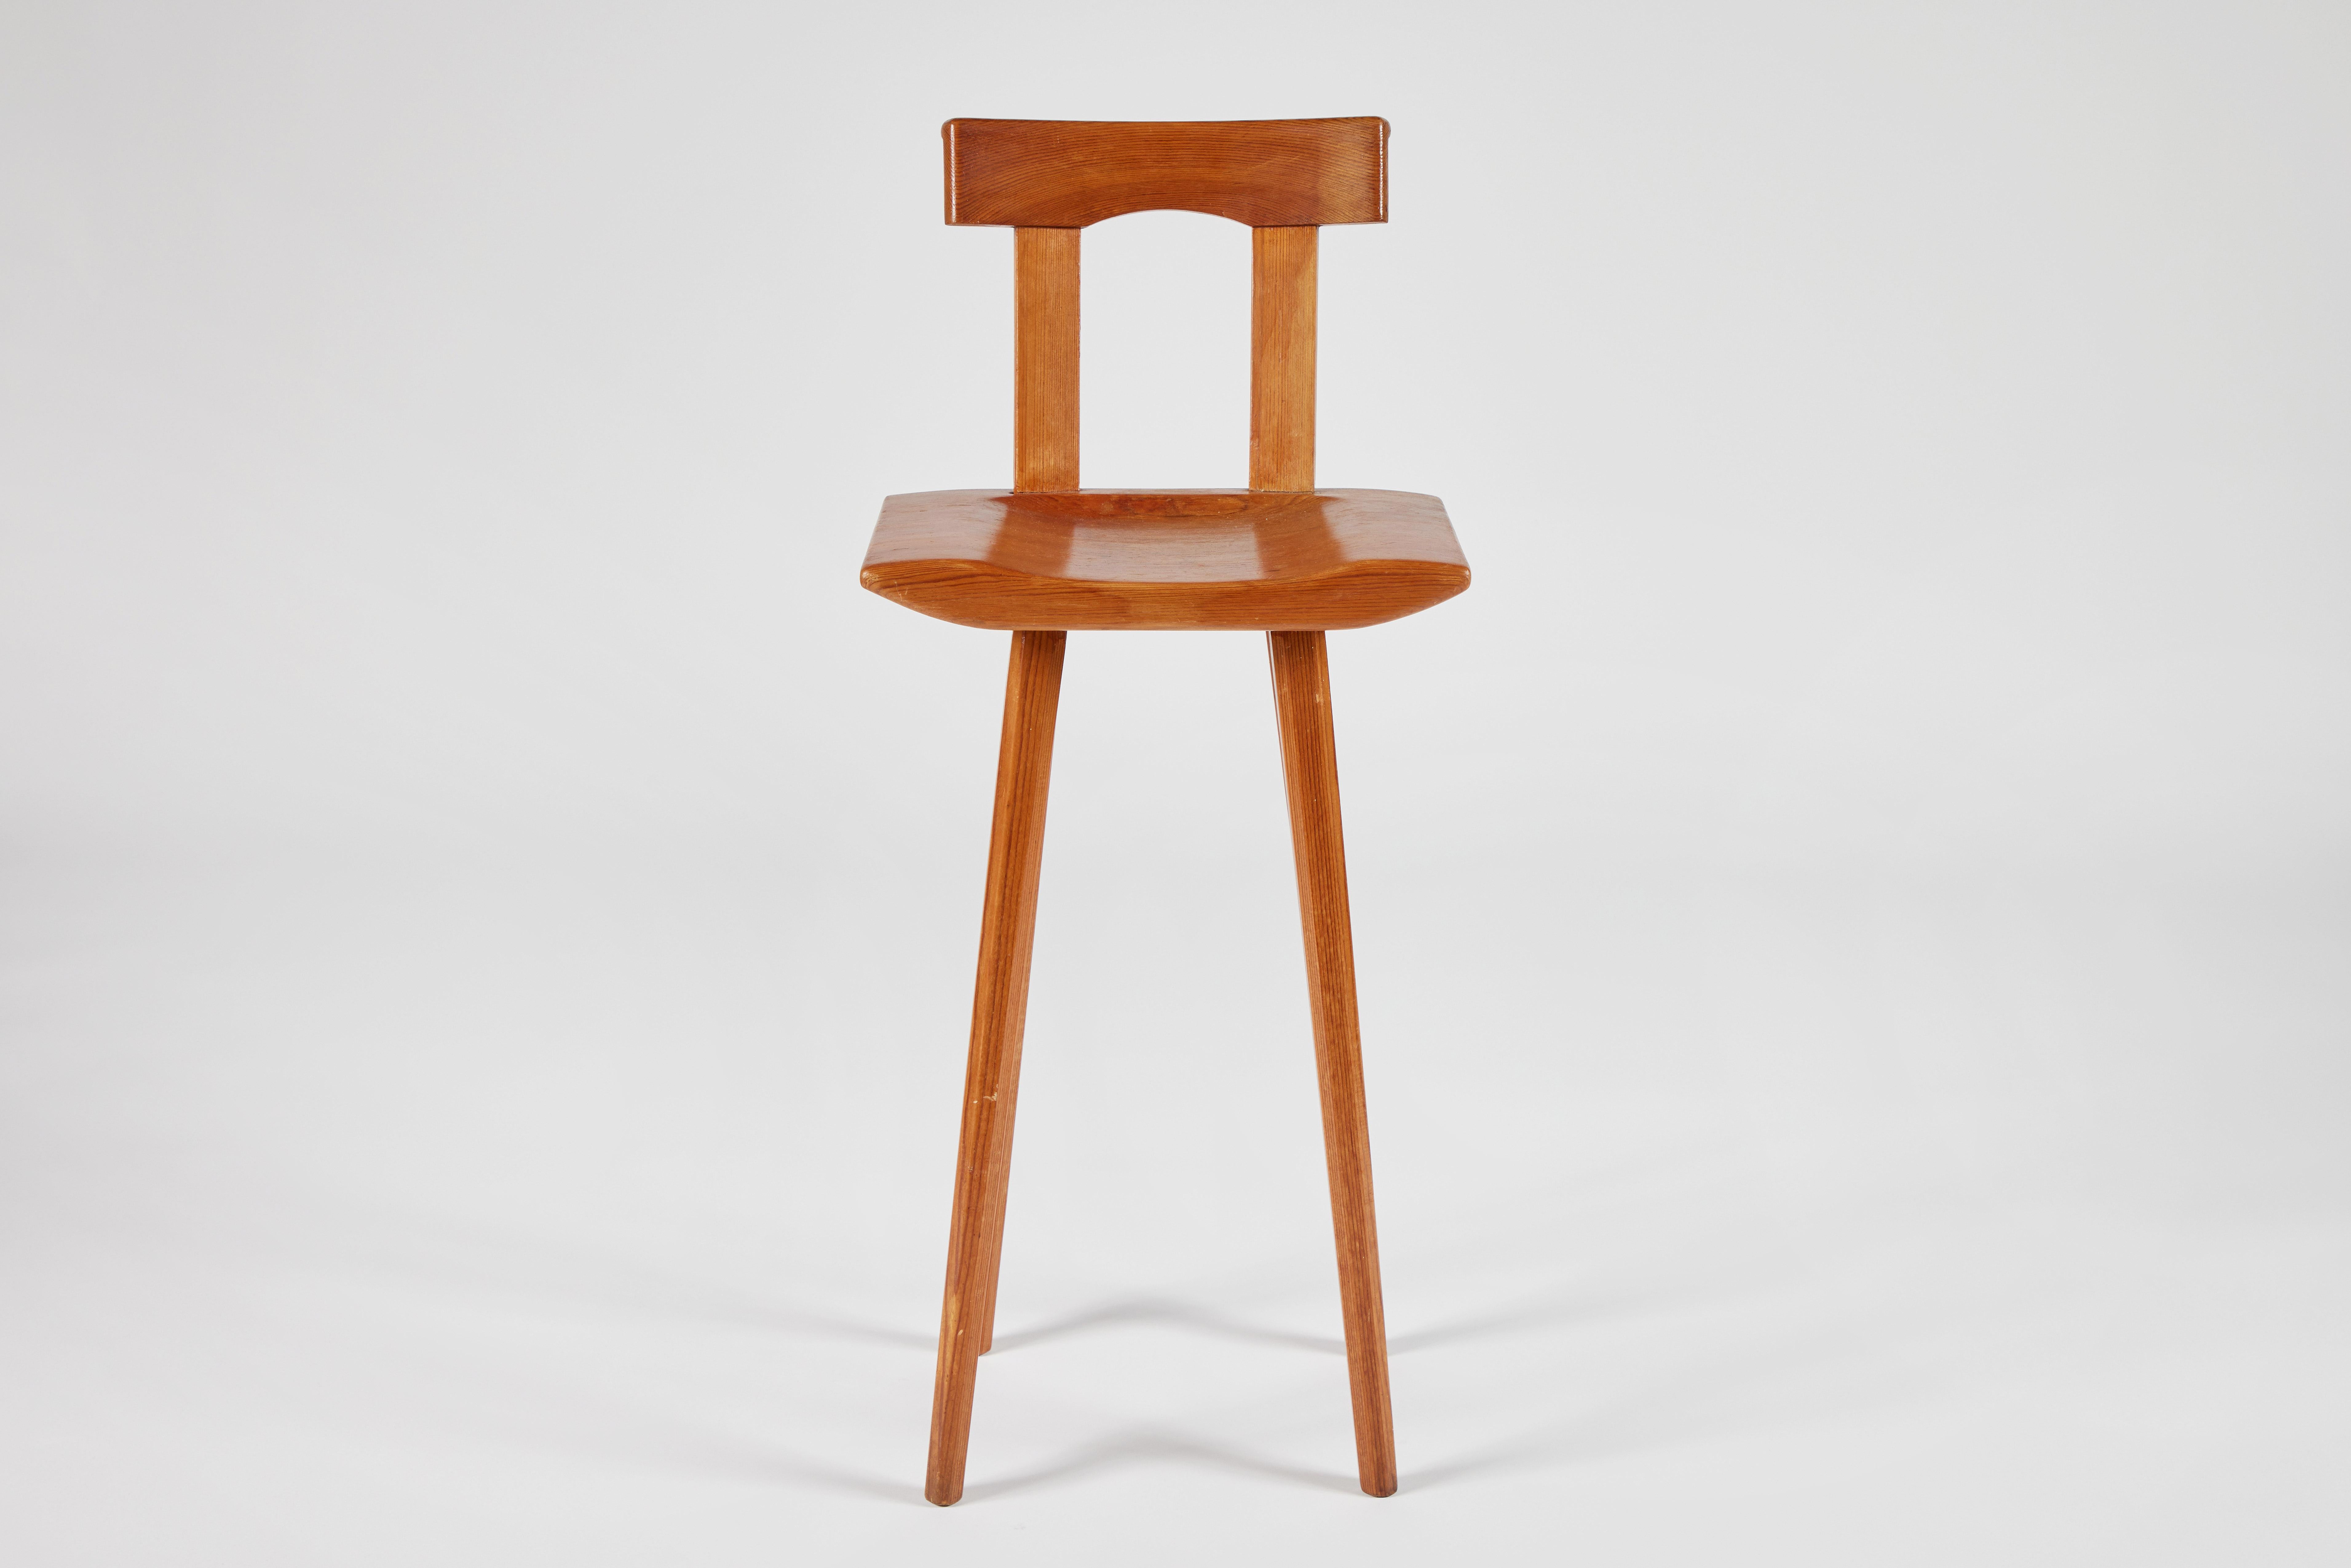 1960s Swedish solid pine child's high chair or stool by Bengt Lundren.